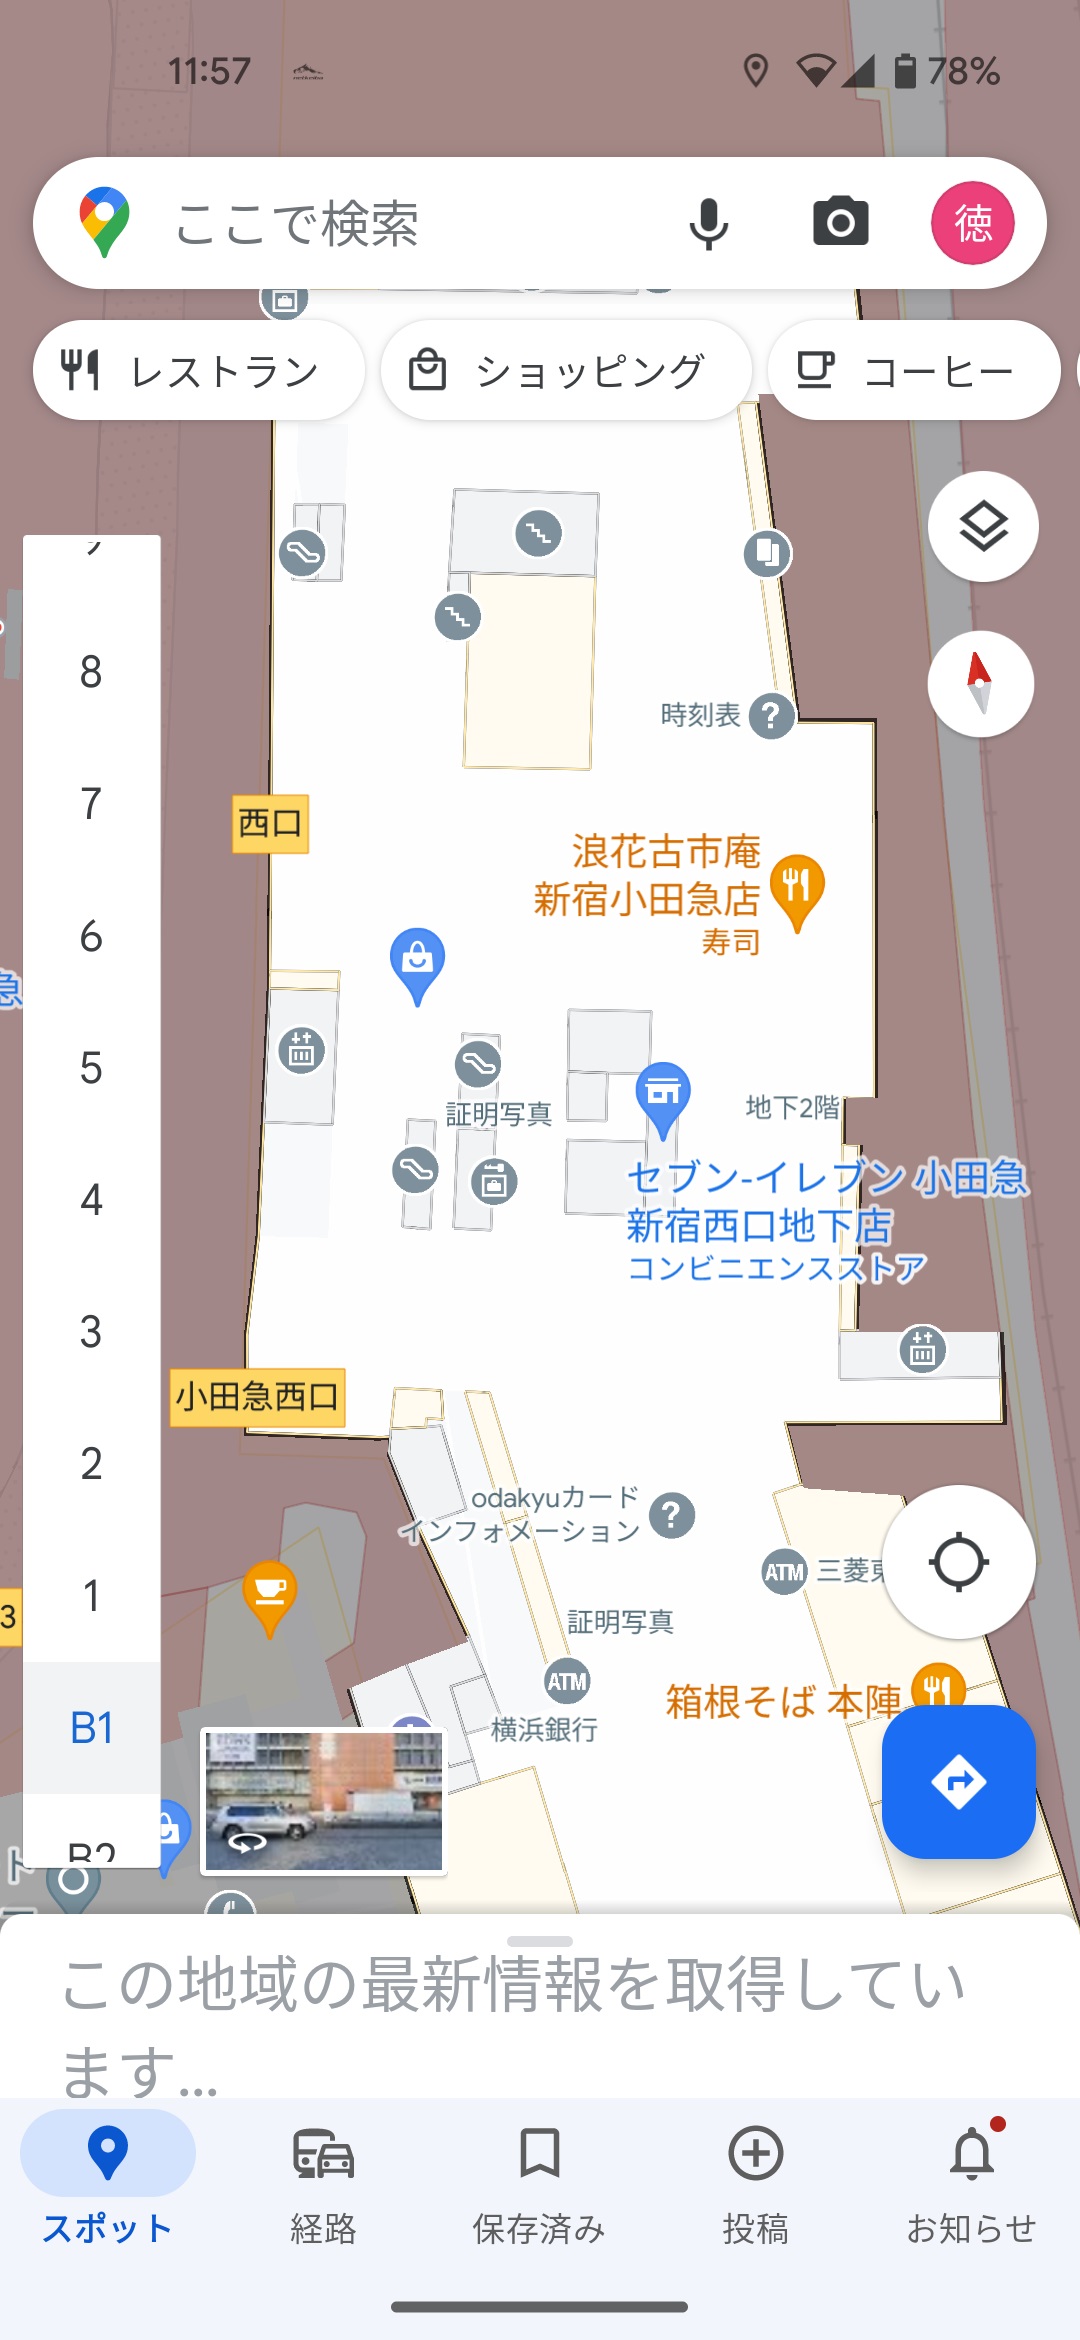 Android版Google Mapより